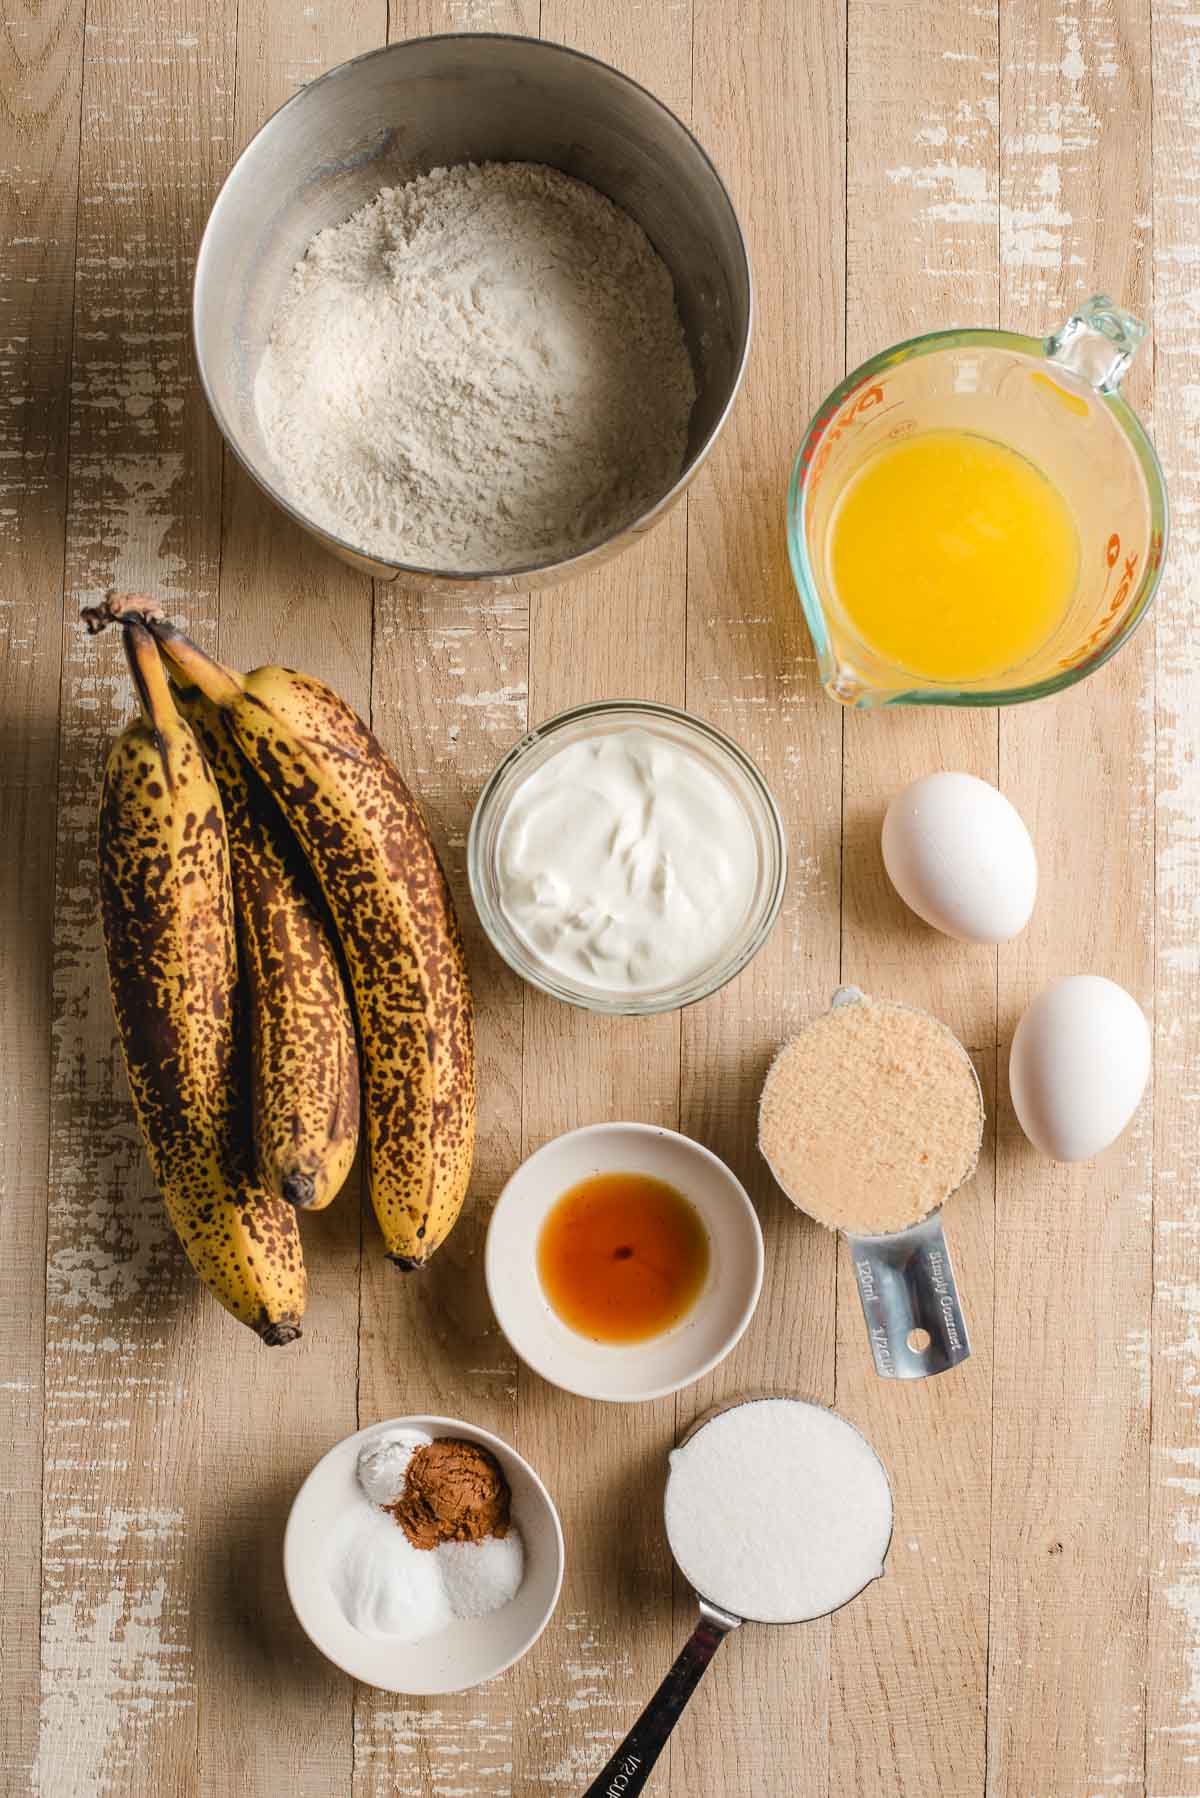 Ingredients for banana bread arranged on a light wood background.